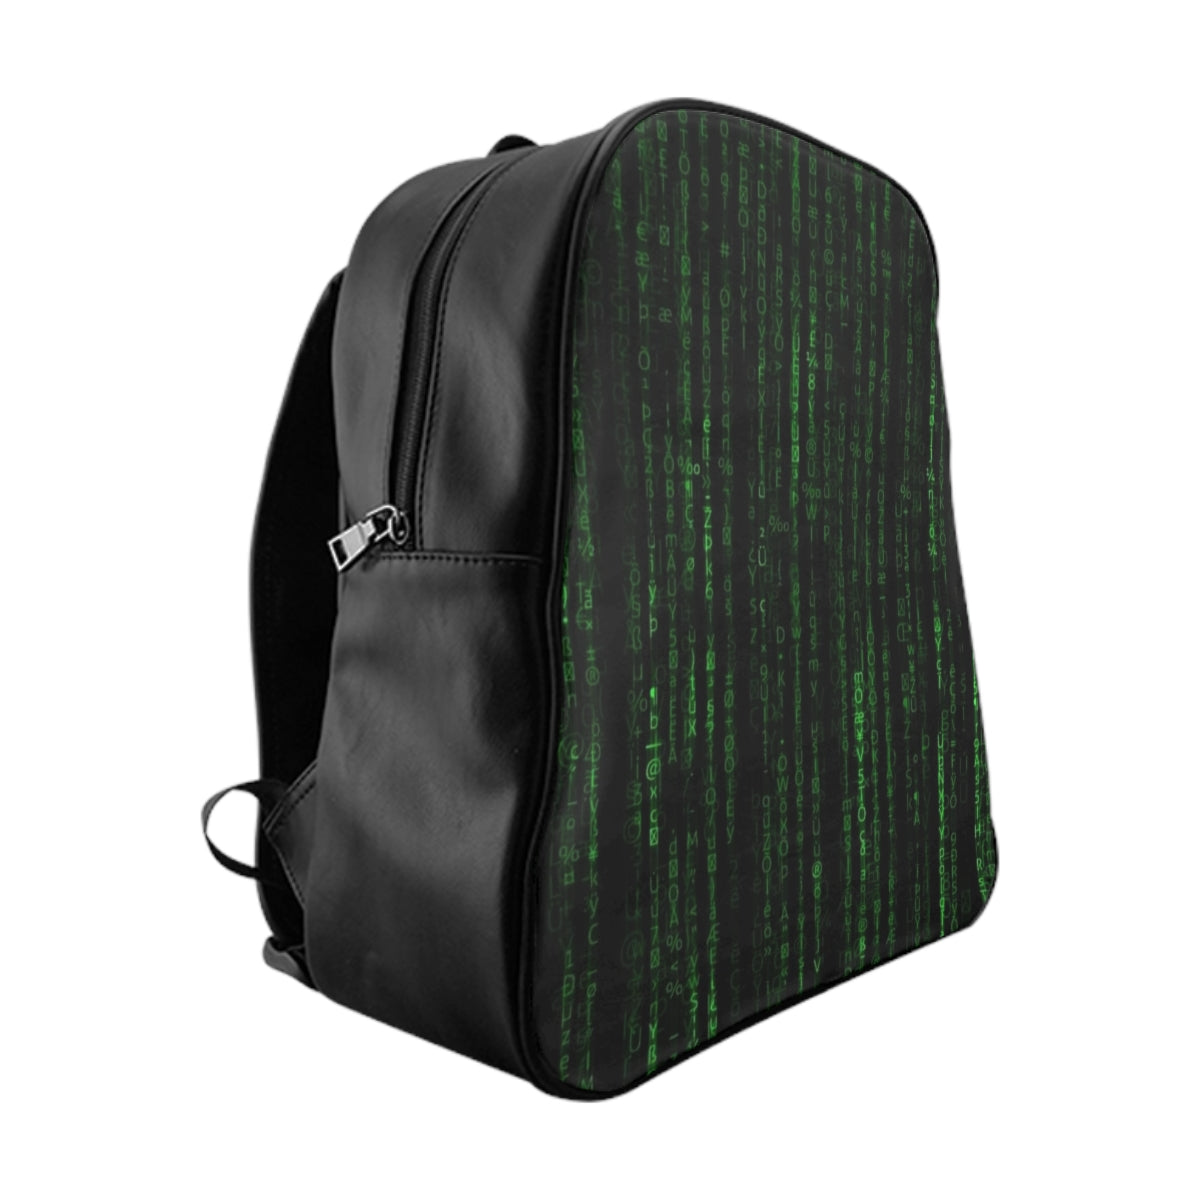 Getrott The Matrix Reloaded Resurrections Revolutions Trilogy Matrixmovies Glitch in the Matrix Animatrix Keanu Reeves Poster School Backpack Carry-On Travel Check Luggage 4-Wheel Spinner Suitcase Bag Multiple Colors and Sizes-Bags-Geotrott